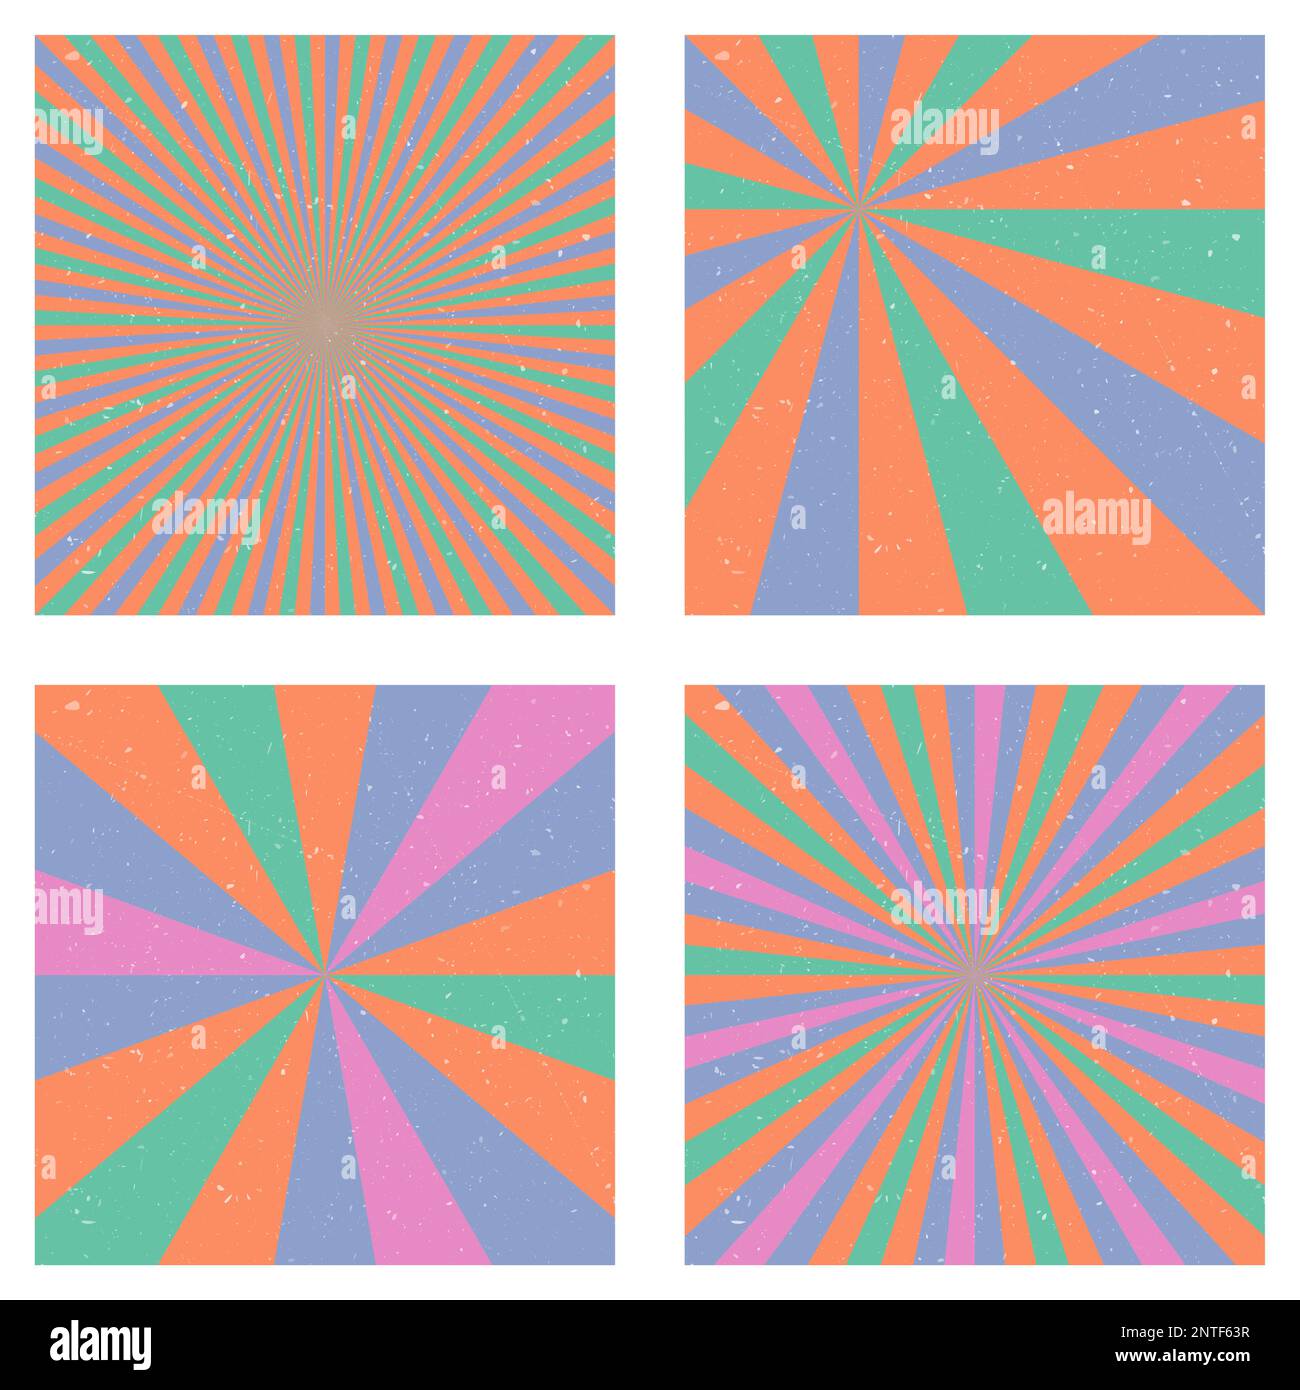 Artistic vintage backgrounds. Abstract sunburst covers with radial rays. Vibrant vector illustration. Stock Vector